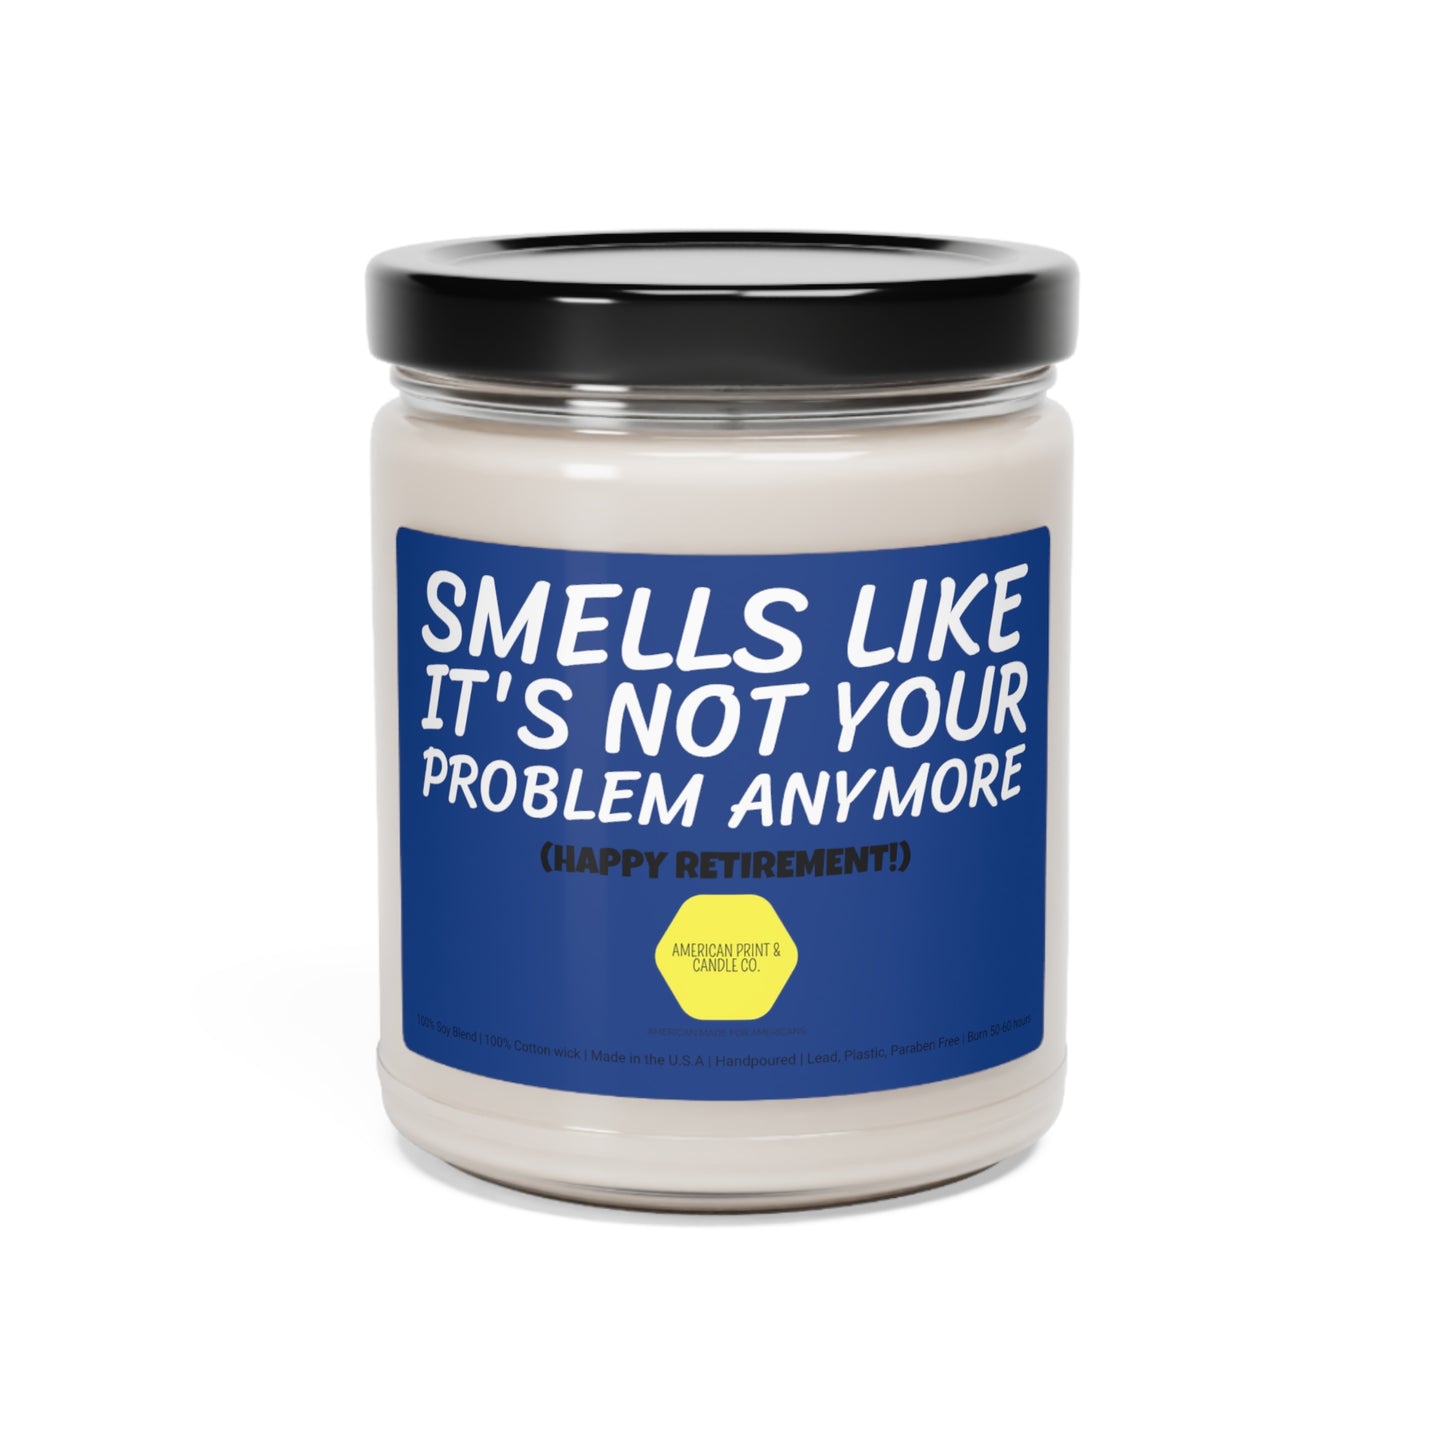 Smells like it's not your problem anymore, Retirement Scented Soy Jar Candle, 9oz Gift